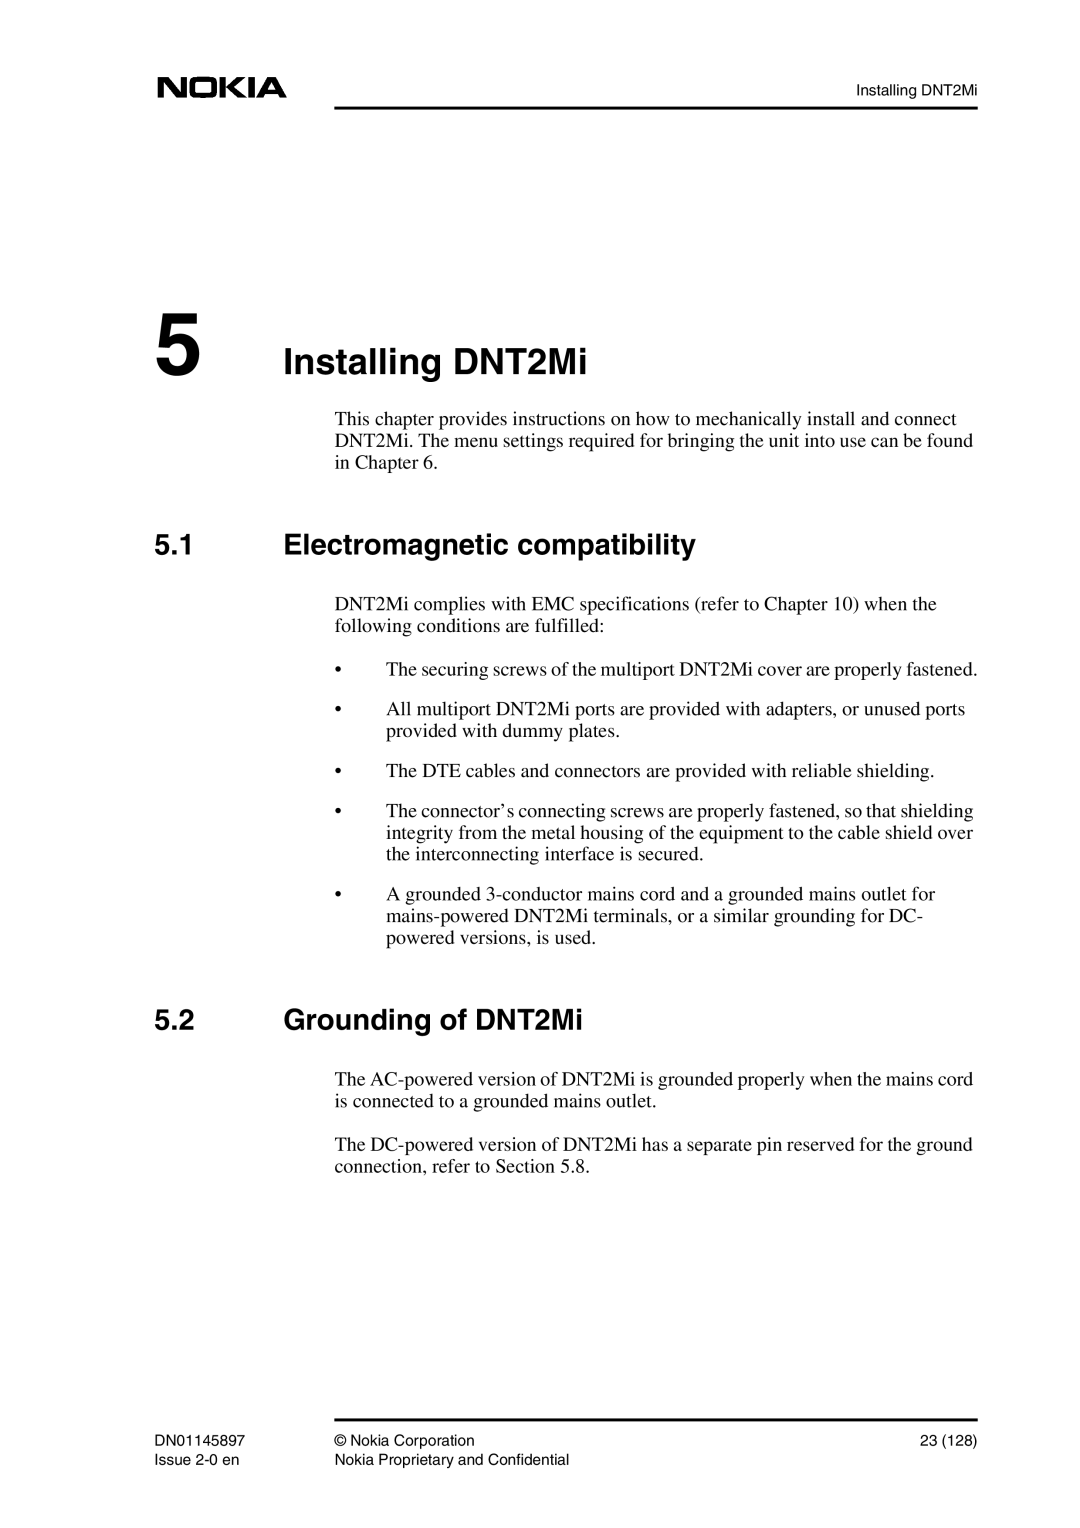 Nokia DNT2Mi sp/mp user manual Installing DNT2Mi, Electromagnetic compatibility, Grounding of DNT2Mi 